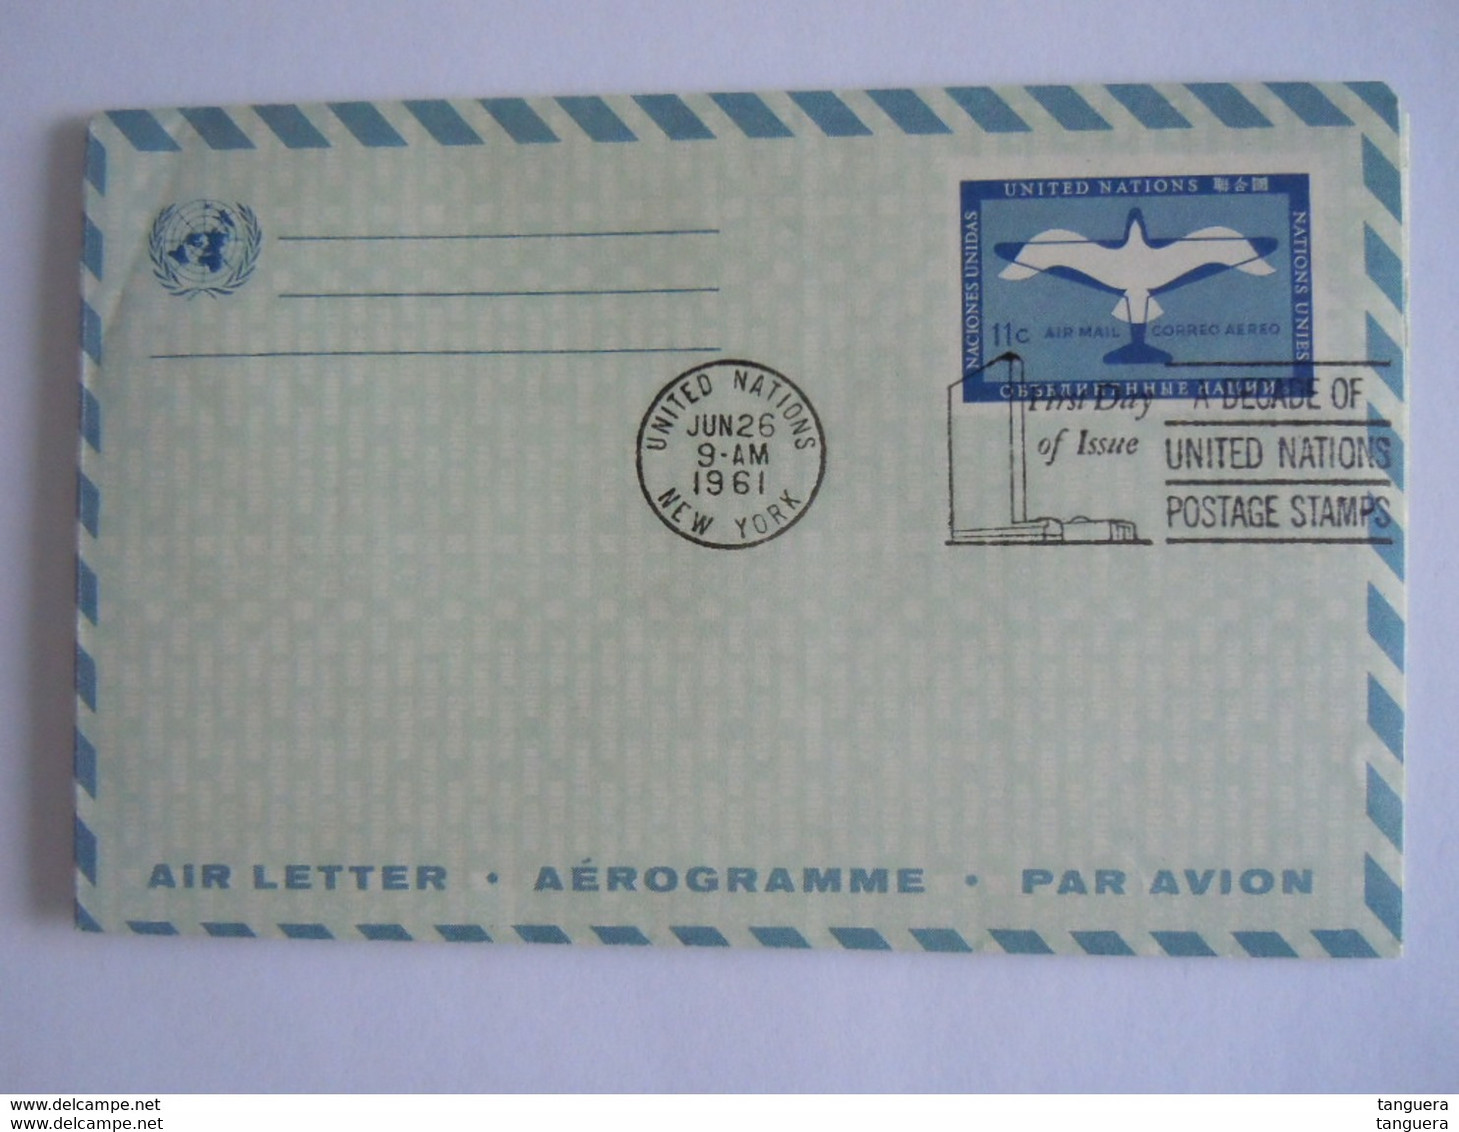 UN UNO United Nations New York Aerogramme Stationery Entier Postal Air Letter 1961 First Day Of Issue - Luftpost